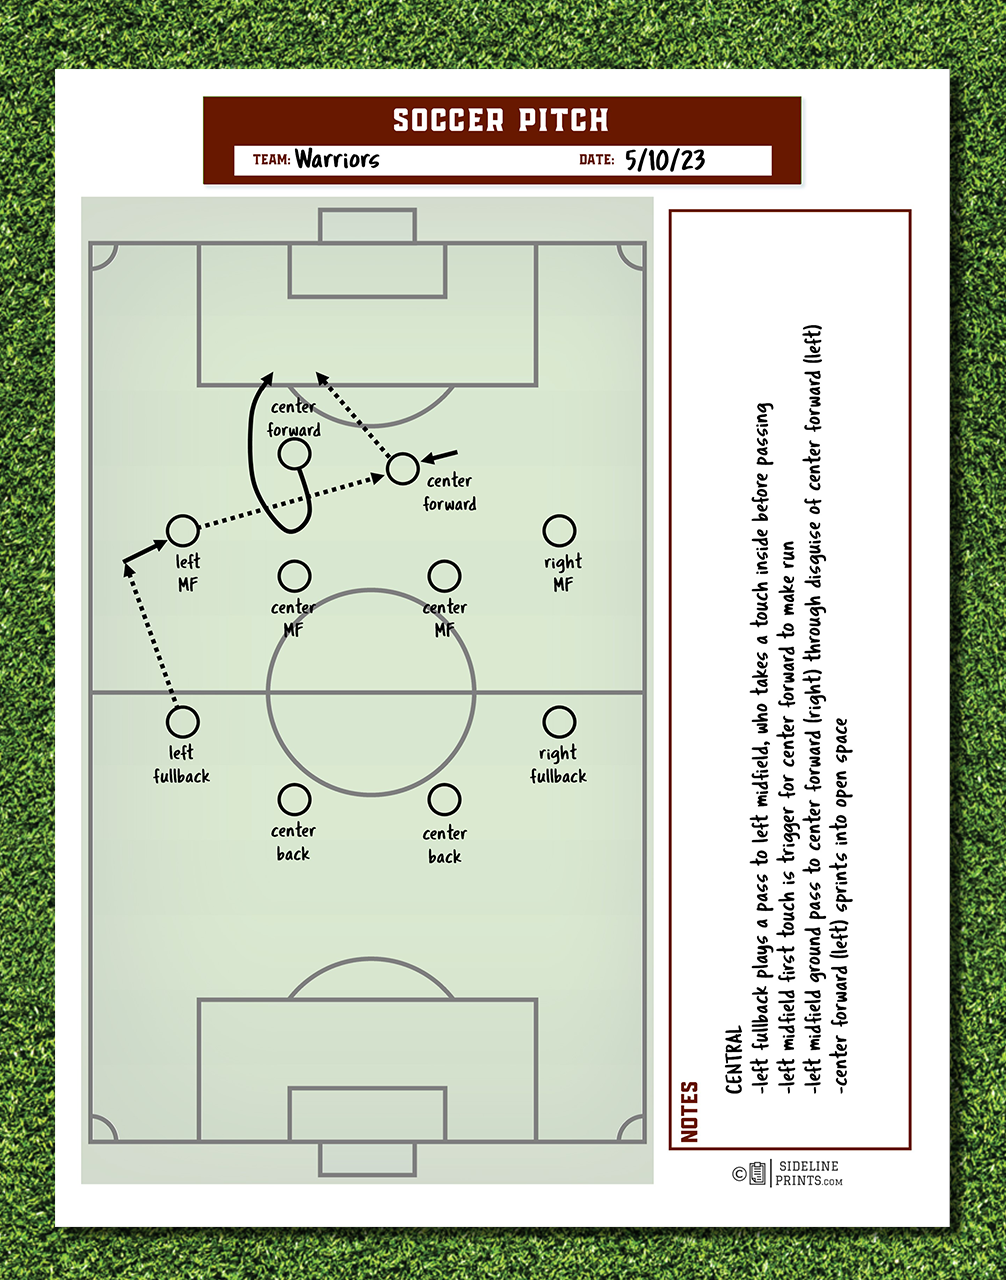 Full Pitch Template